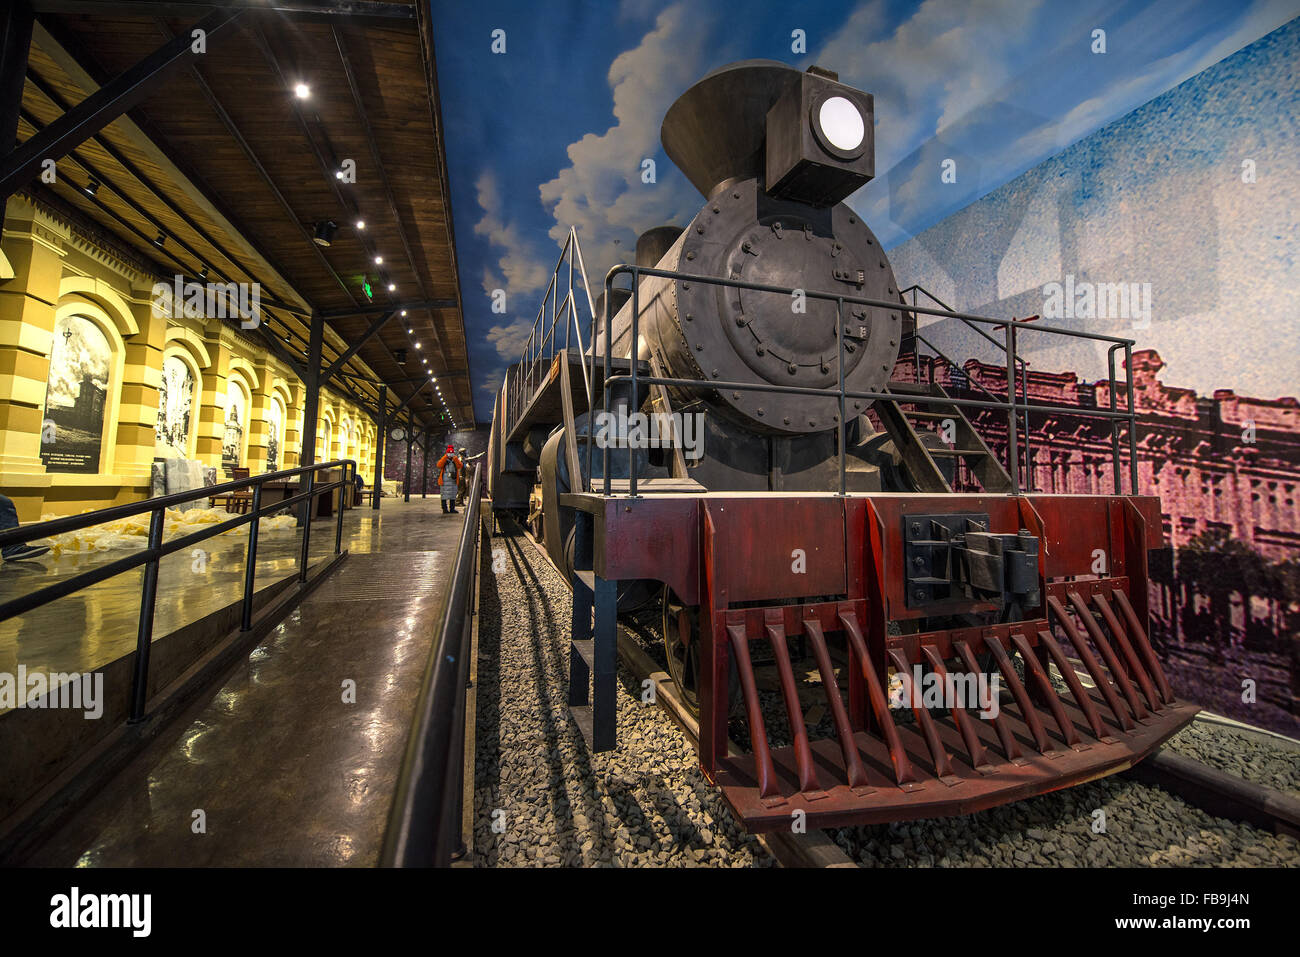 Harbin, Heilongjiang, CHN. 27th Dec, 2015. Harbin, CHINA - December 27 2015: (EDITORIAL USE ONLY. CHINA OUT) Harbin Beer Museum. © SIPA Asia/ZUMA Wire/Alamy Live News Stock Photo